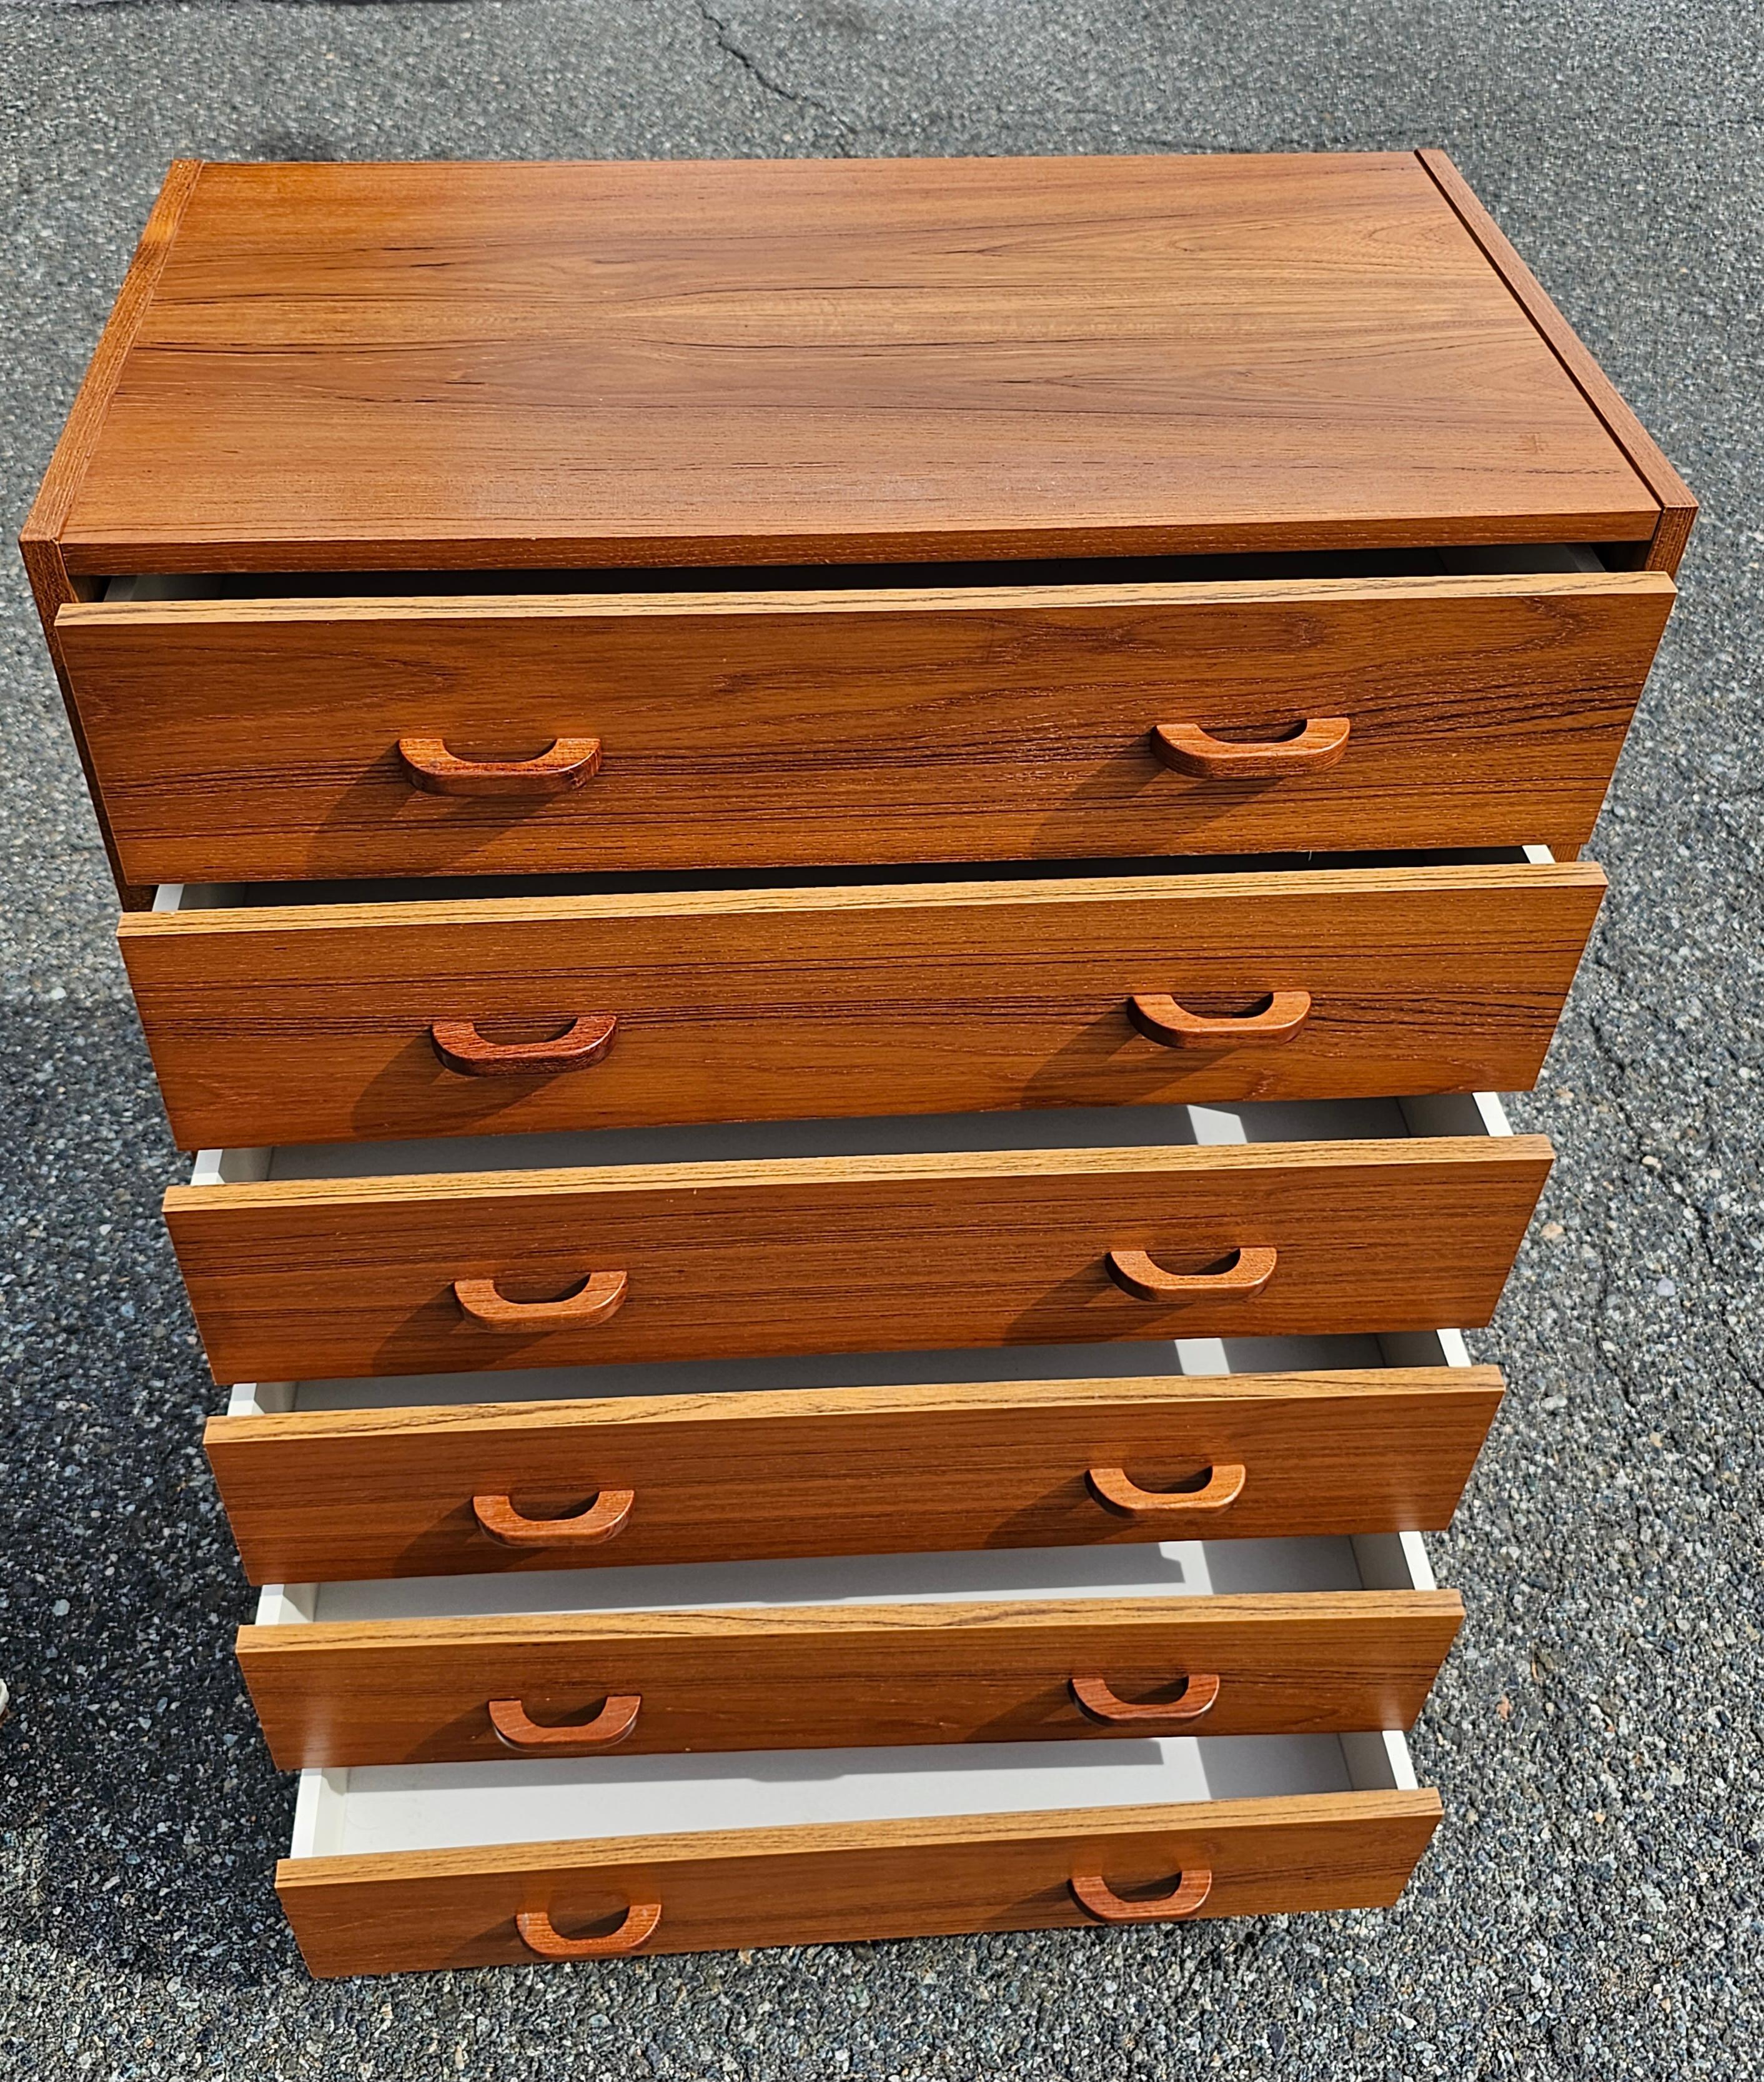 Wood Late 20th Century Danish Modern Teak Chest of Drawers For Sale